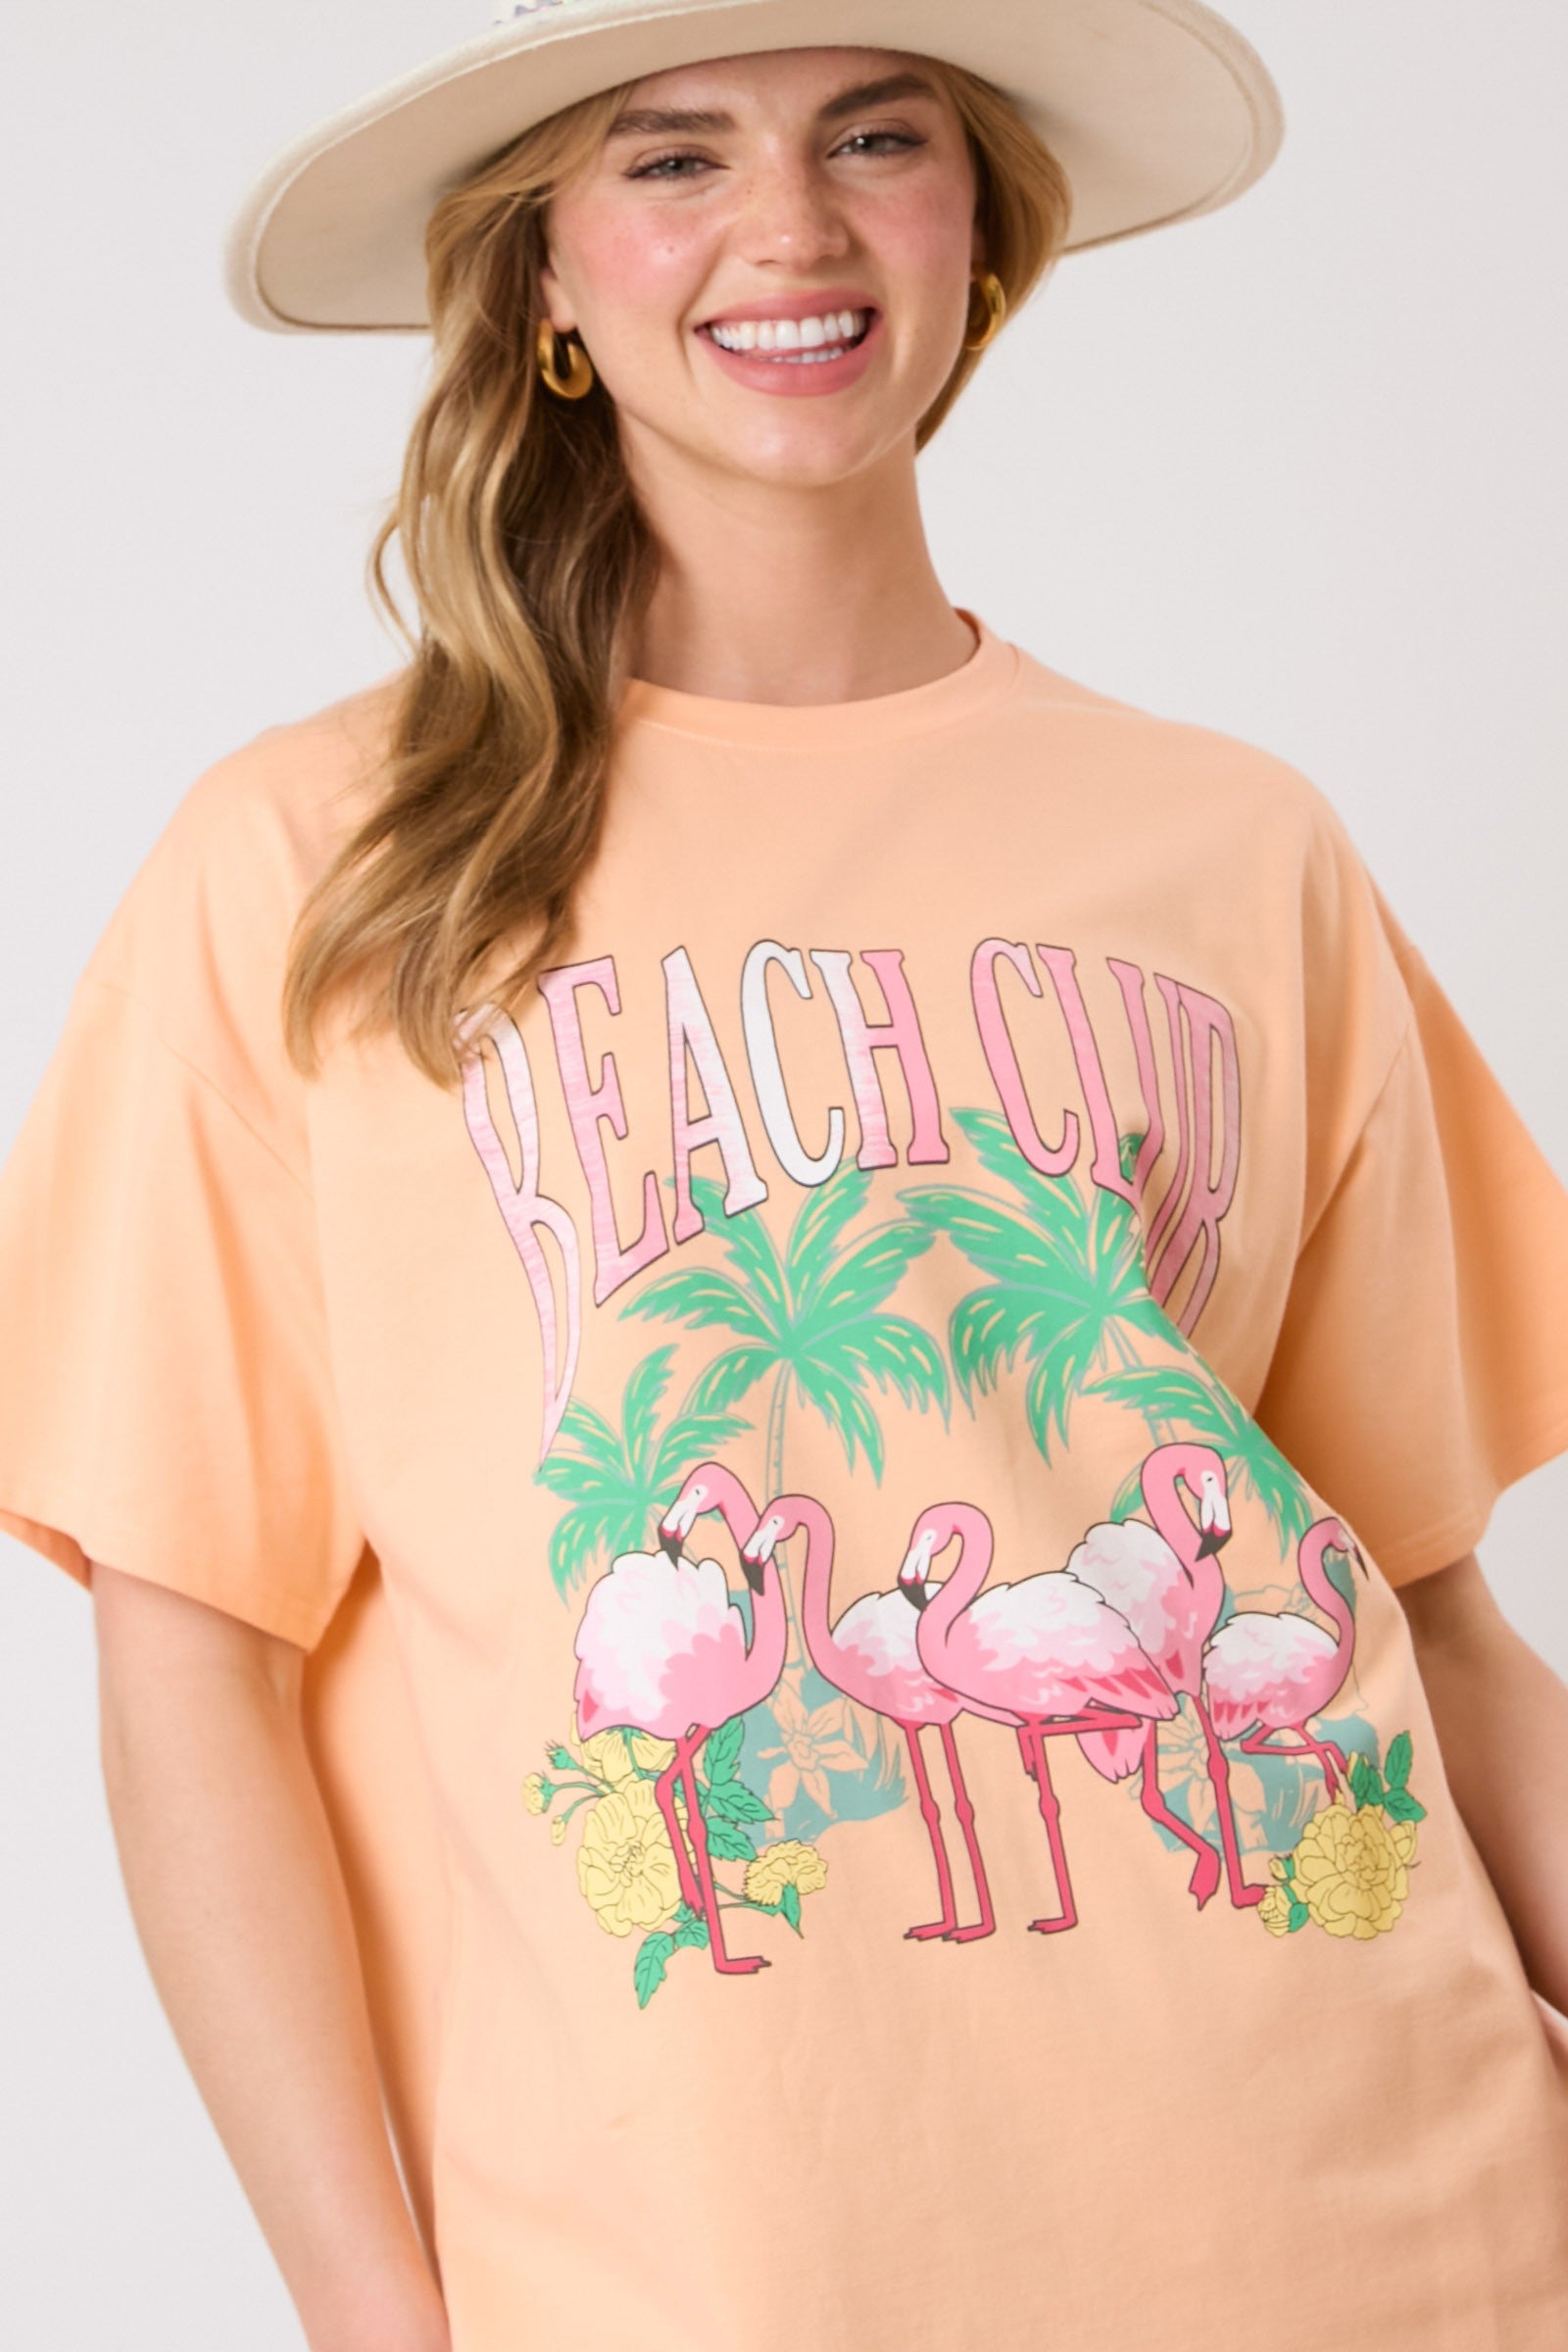 Beach Club Short Sleeve Graphic Tee Top - Be You Boutique